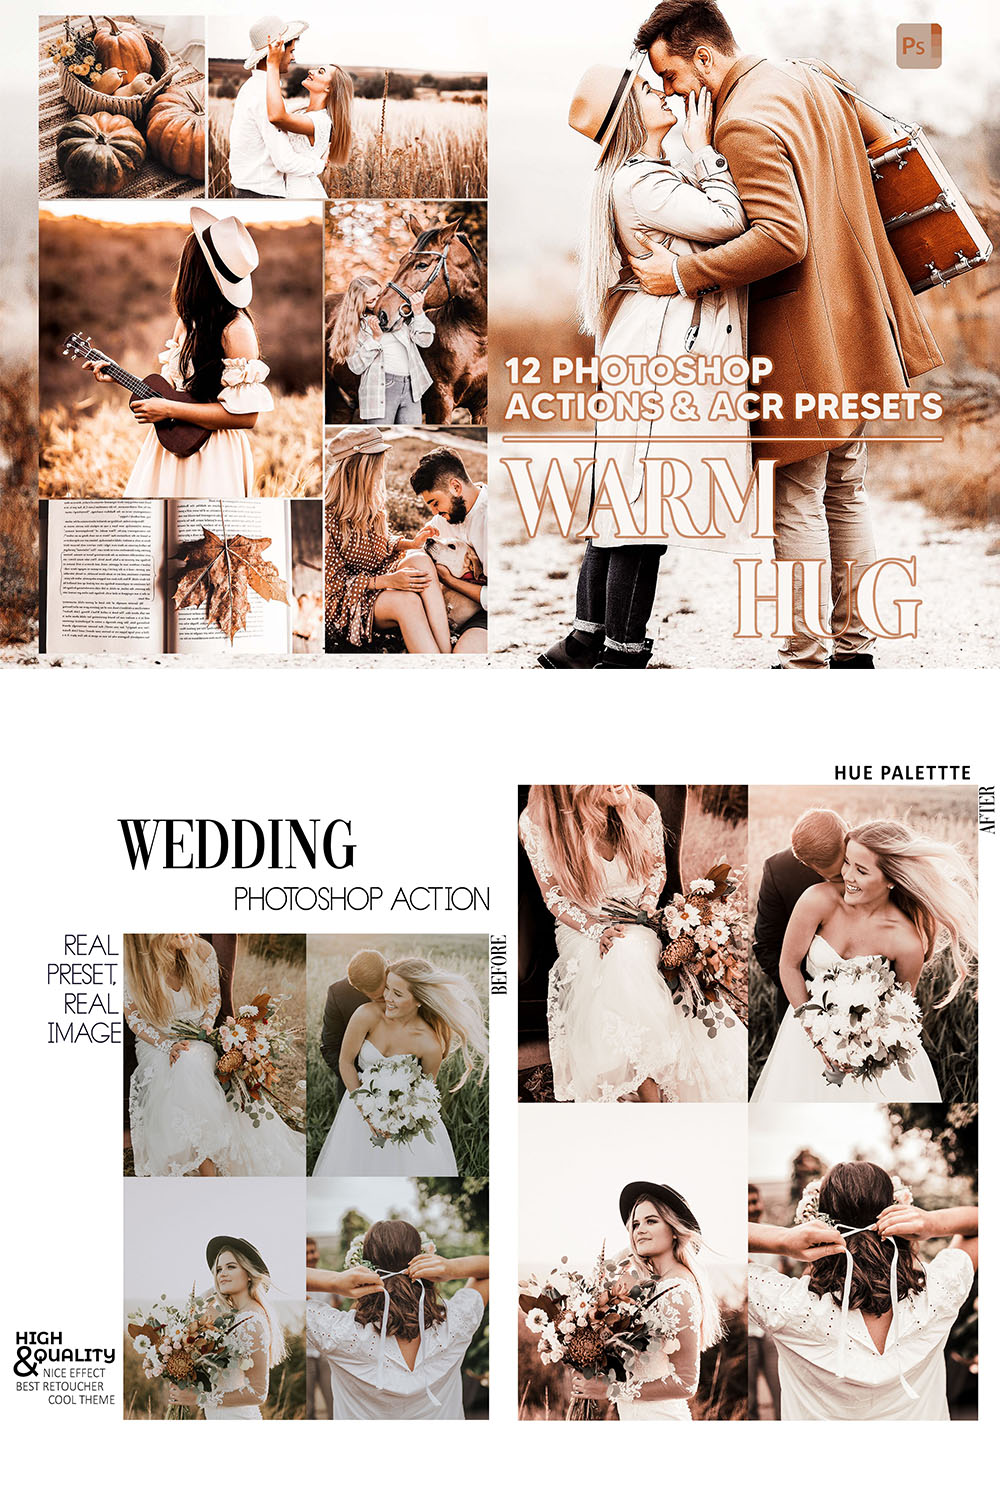 12 Photoshop Actions, Warm Hug Ps Action, Love ACR Preset, Autumn Ps Filter, Atn Portrait And Lifestyle Theme For Instagram, Blogger pinterest preview image.